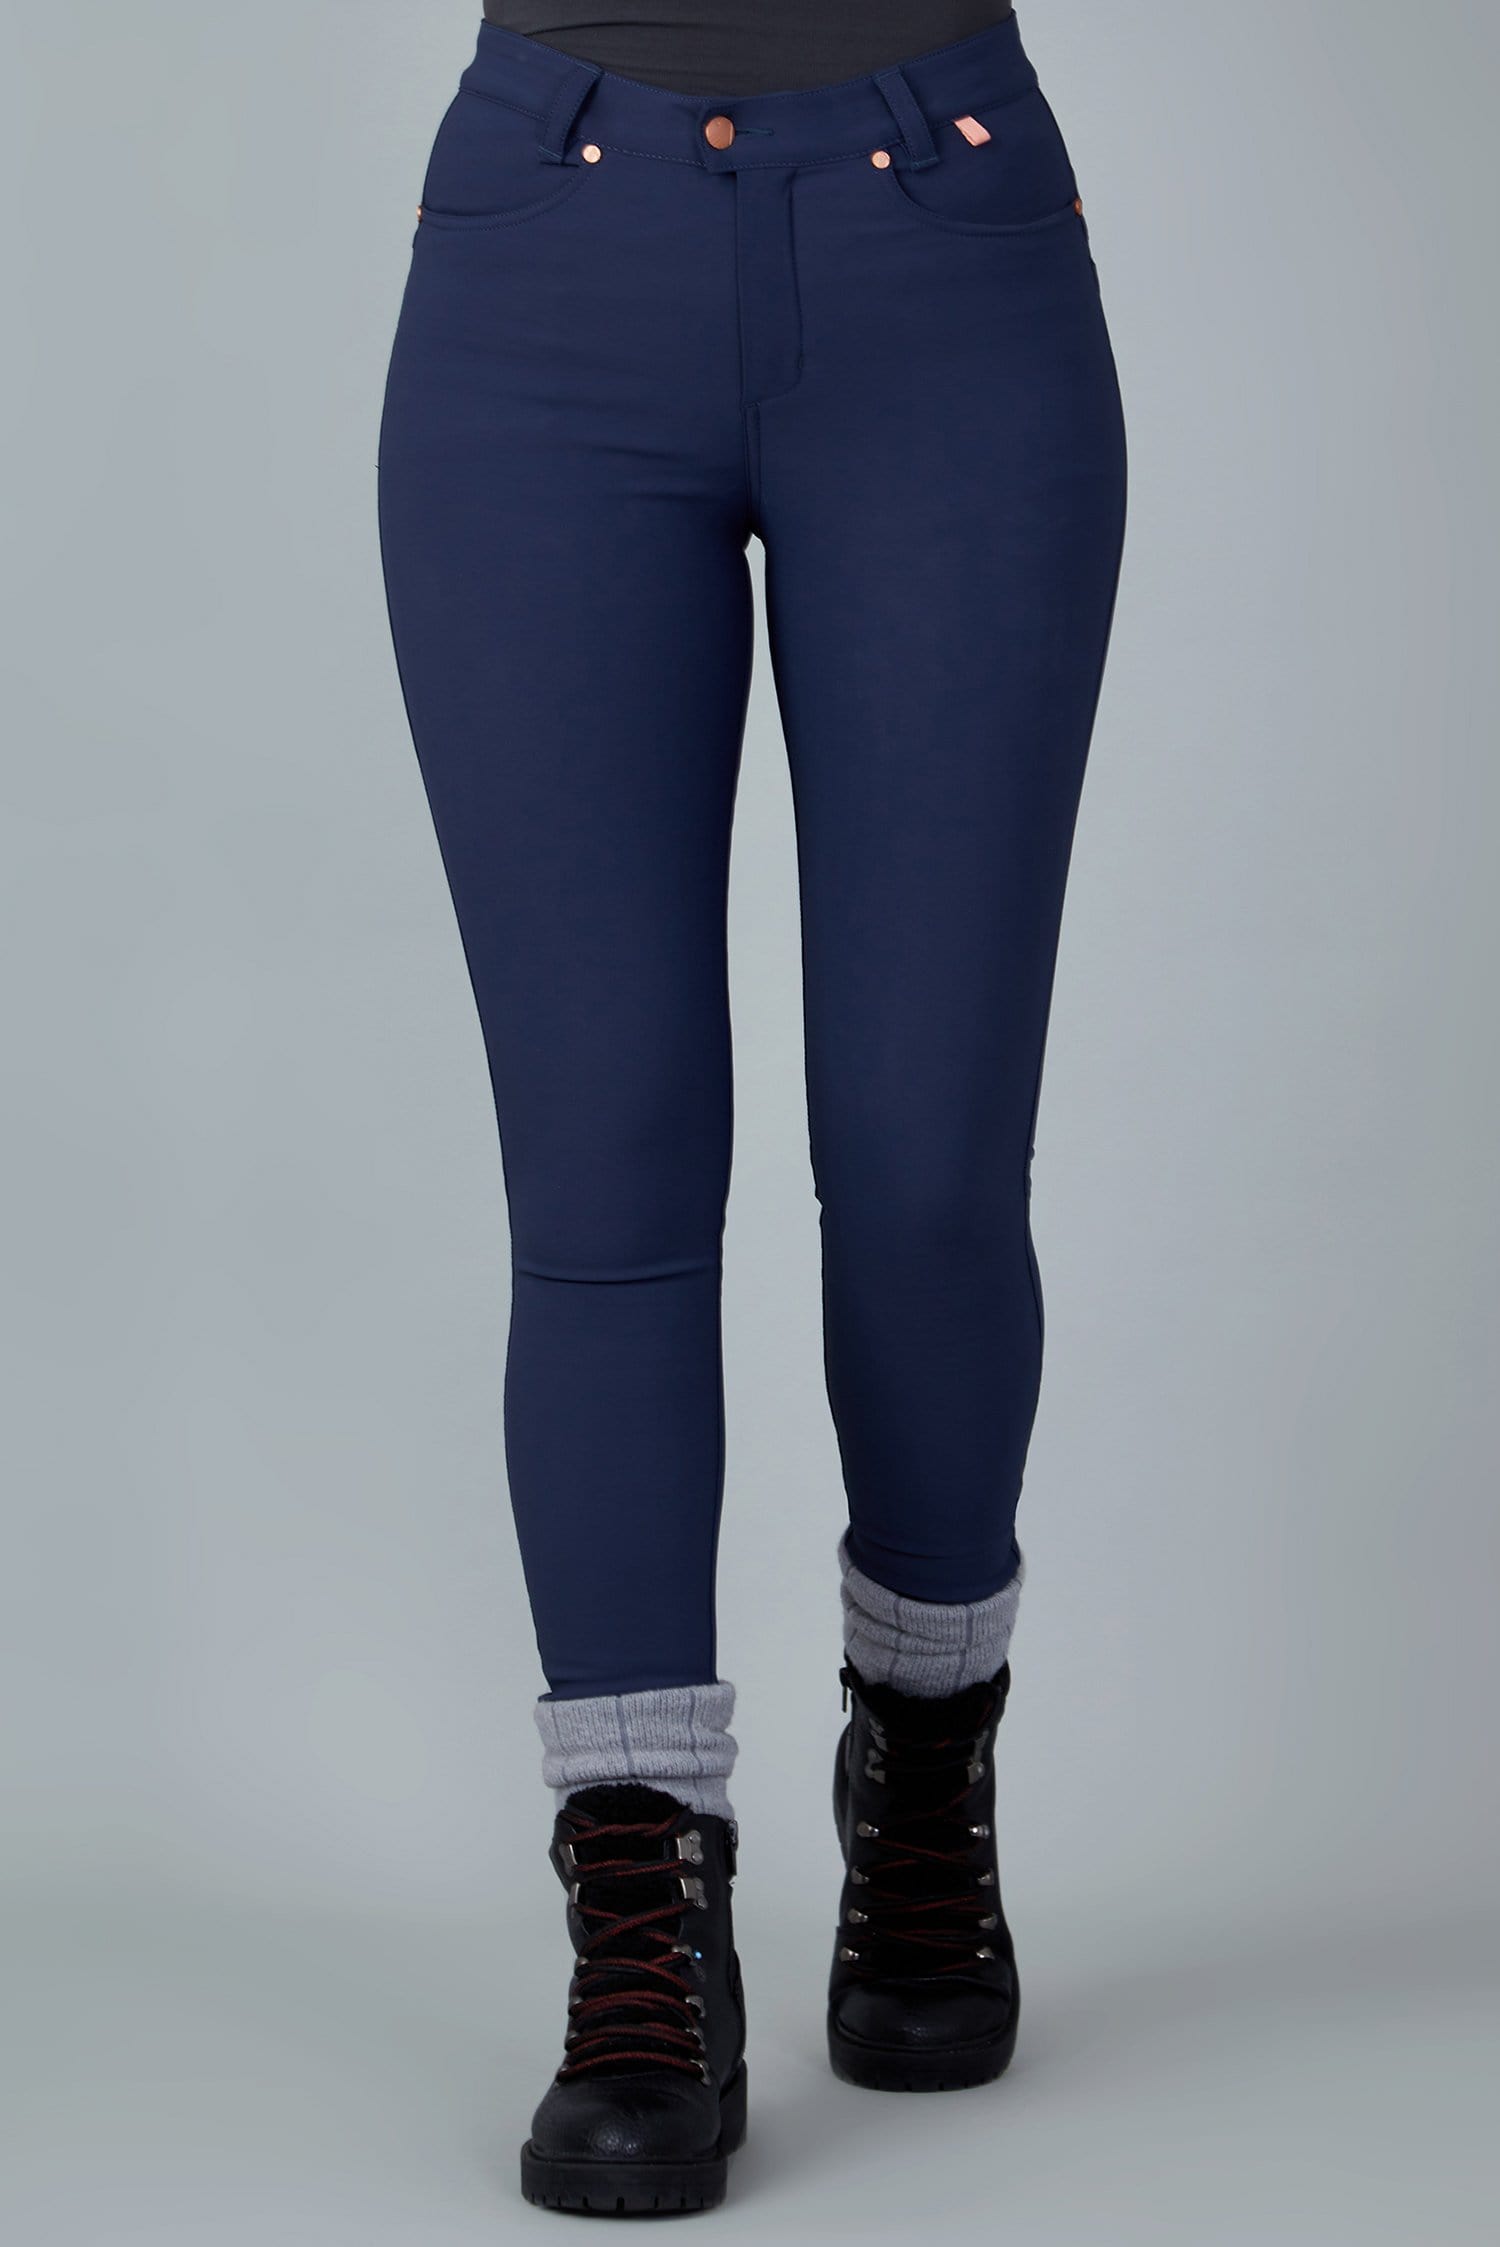 The Aventurite Stretch Skinny Outdoor Trousers - Midnight Blue - 28l / Uk10 - Womens - Acai Outdoorwear